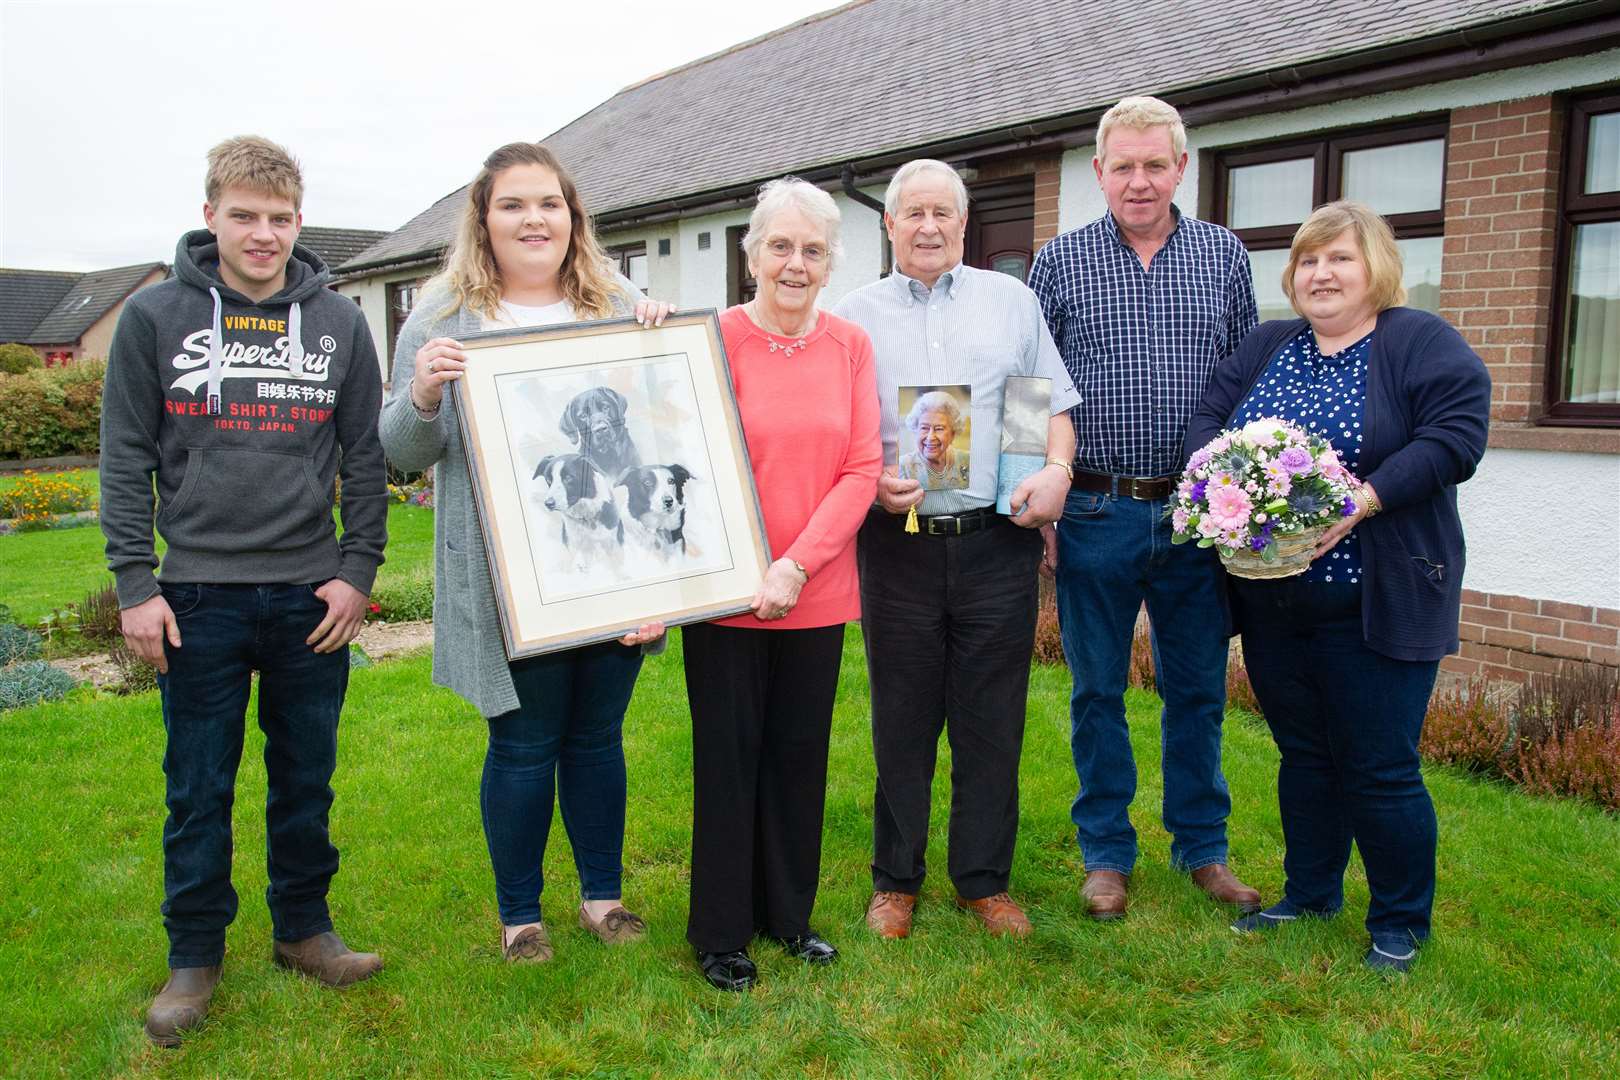 One for the family album, diamond couple Charlie and Edna Cameron with their grandchildren, Euan and Claire, son Charles and daughter in law Heather. The painting of the family's dogs was a gift from the family. Picture: Daniel Forsyth.